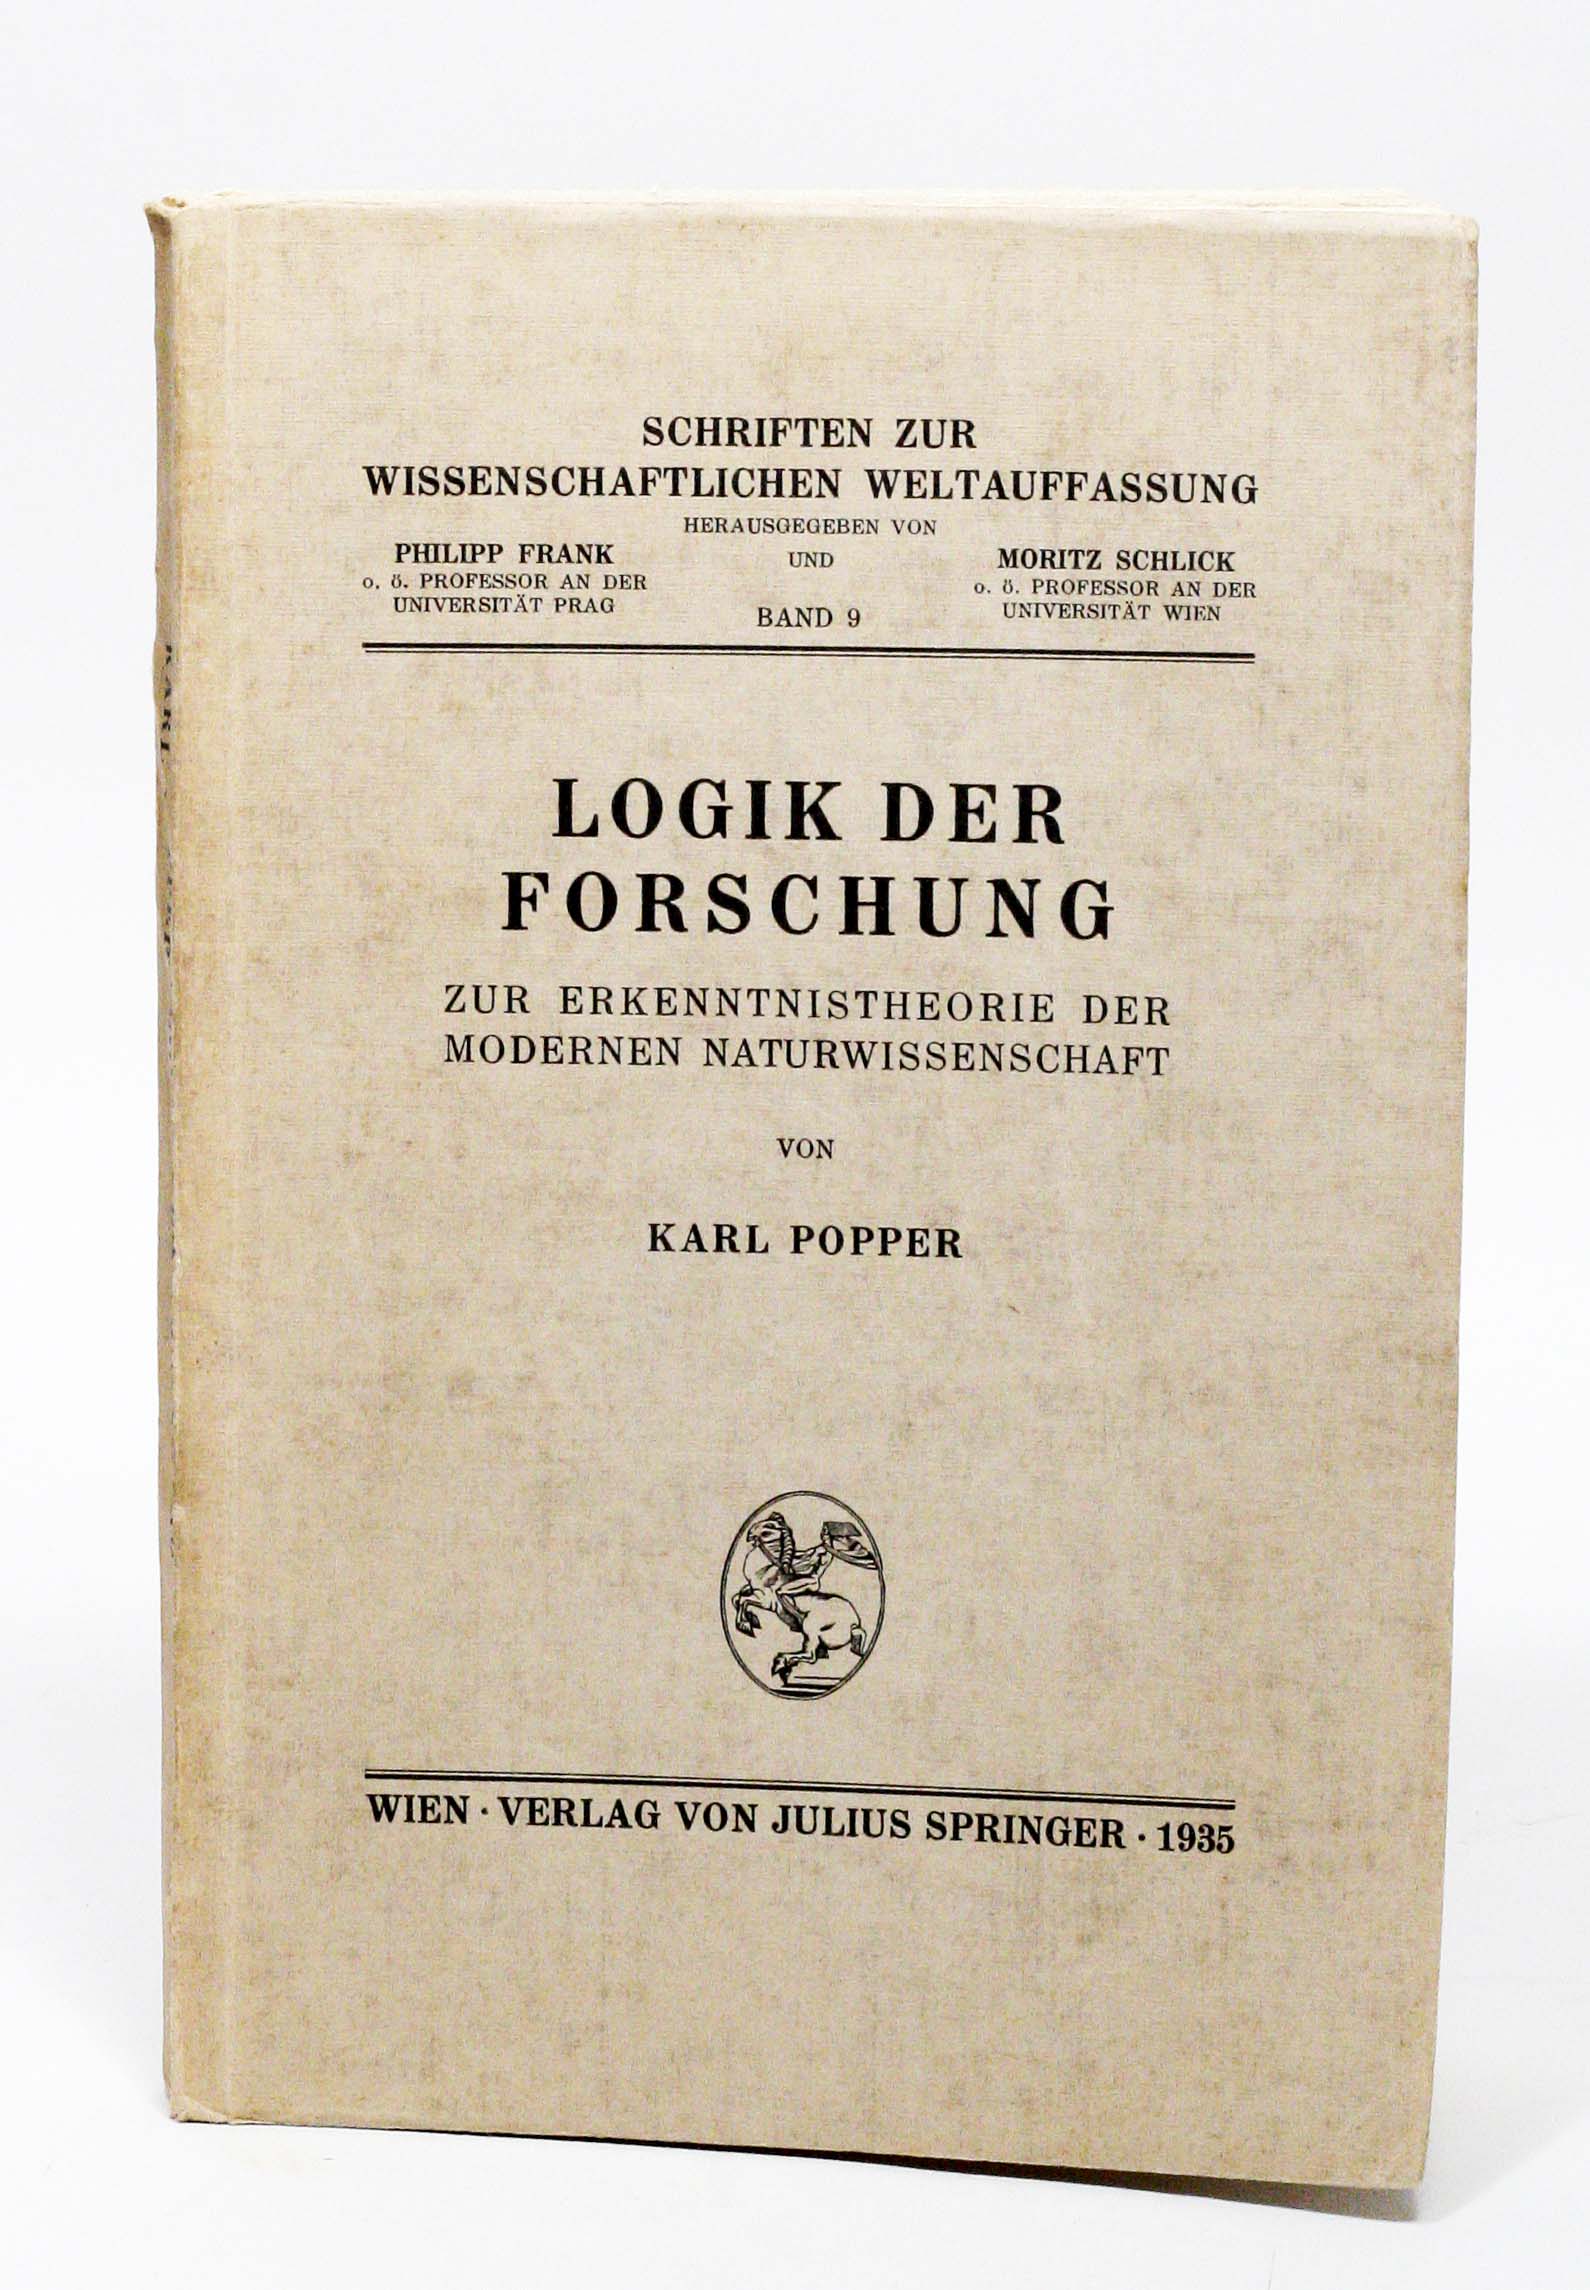 Logik der Forschung The Logic of Scientific Discovery by KARL POPPER on  Manhattan Rare Book Company